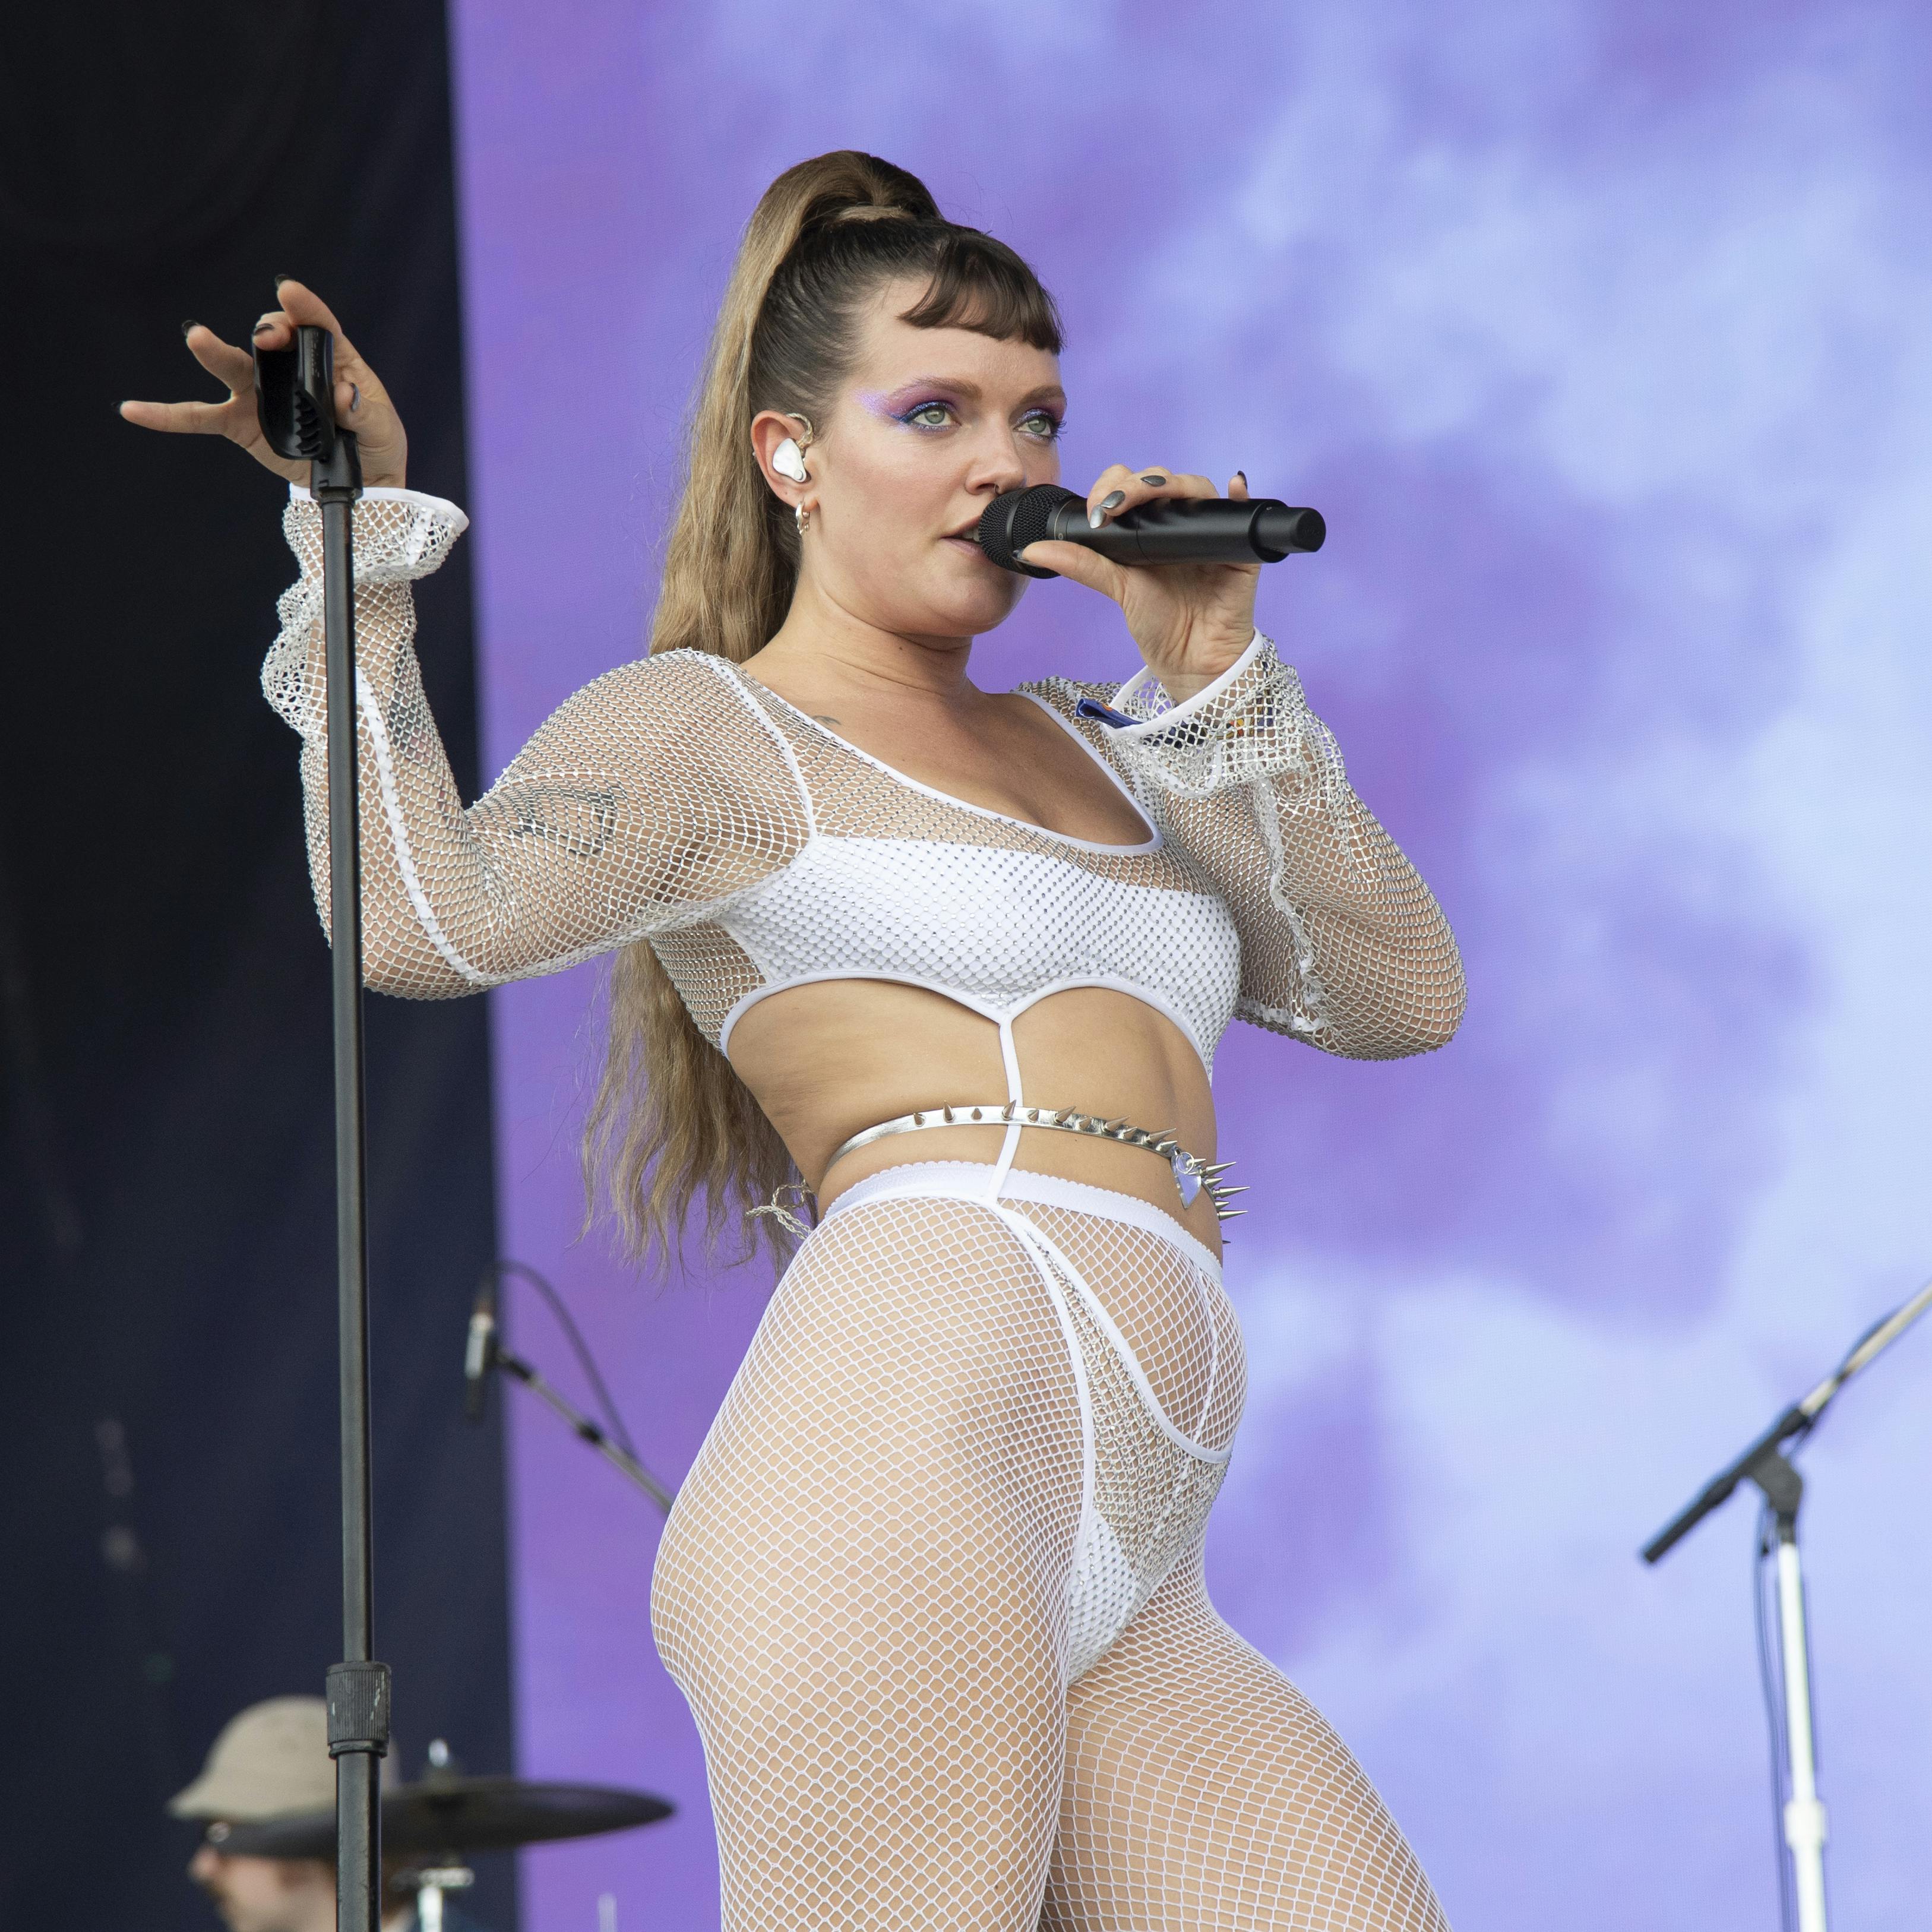 Tove Lo performs at the Bonnaroo Music and Arts Festival on Friday, June 17, 2022 in Manchester, Tenn. (Photo by Amy Harris/Invision/AP)